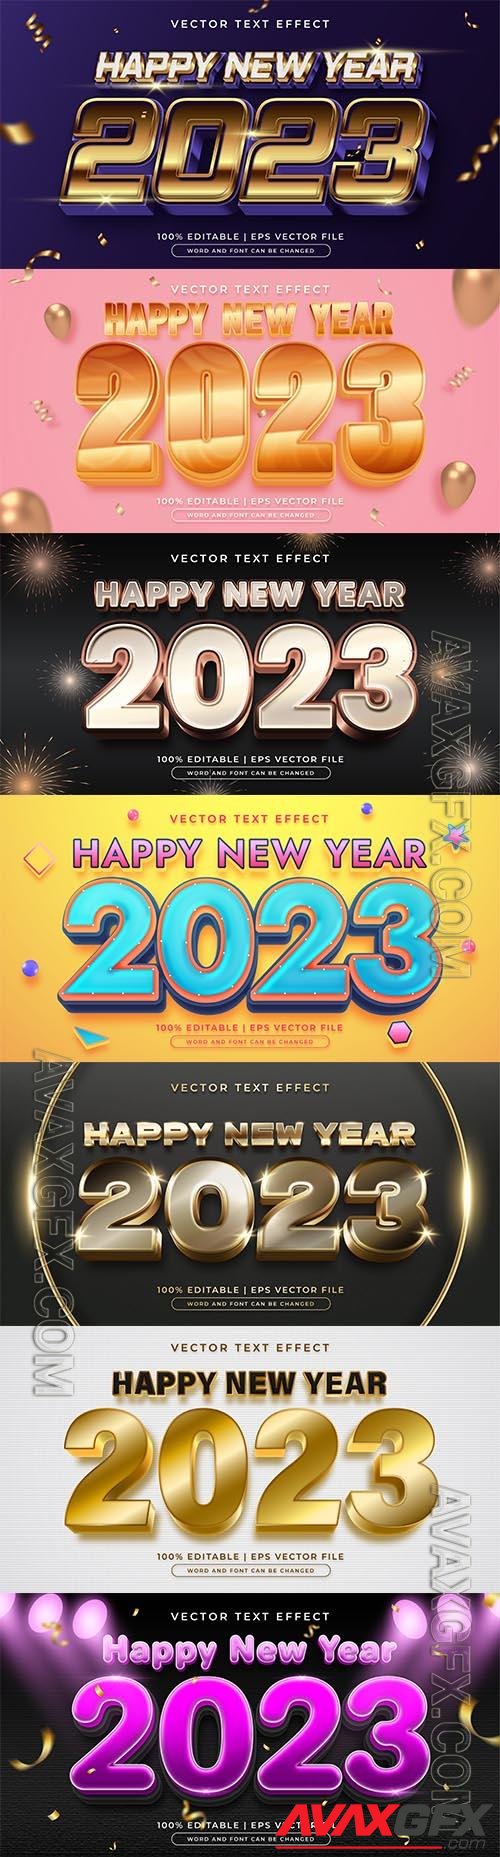 Gold new year 2023 editable text effect vector template